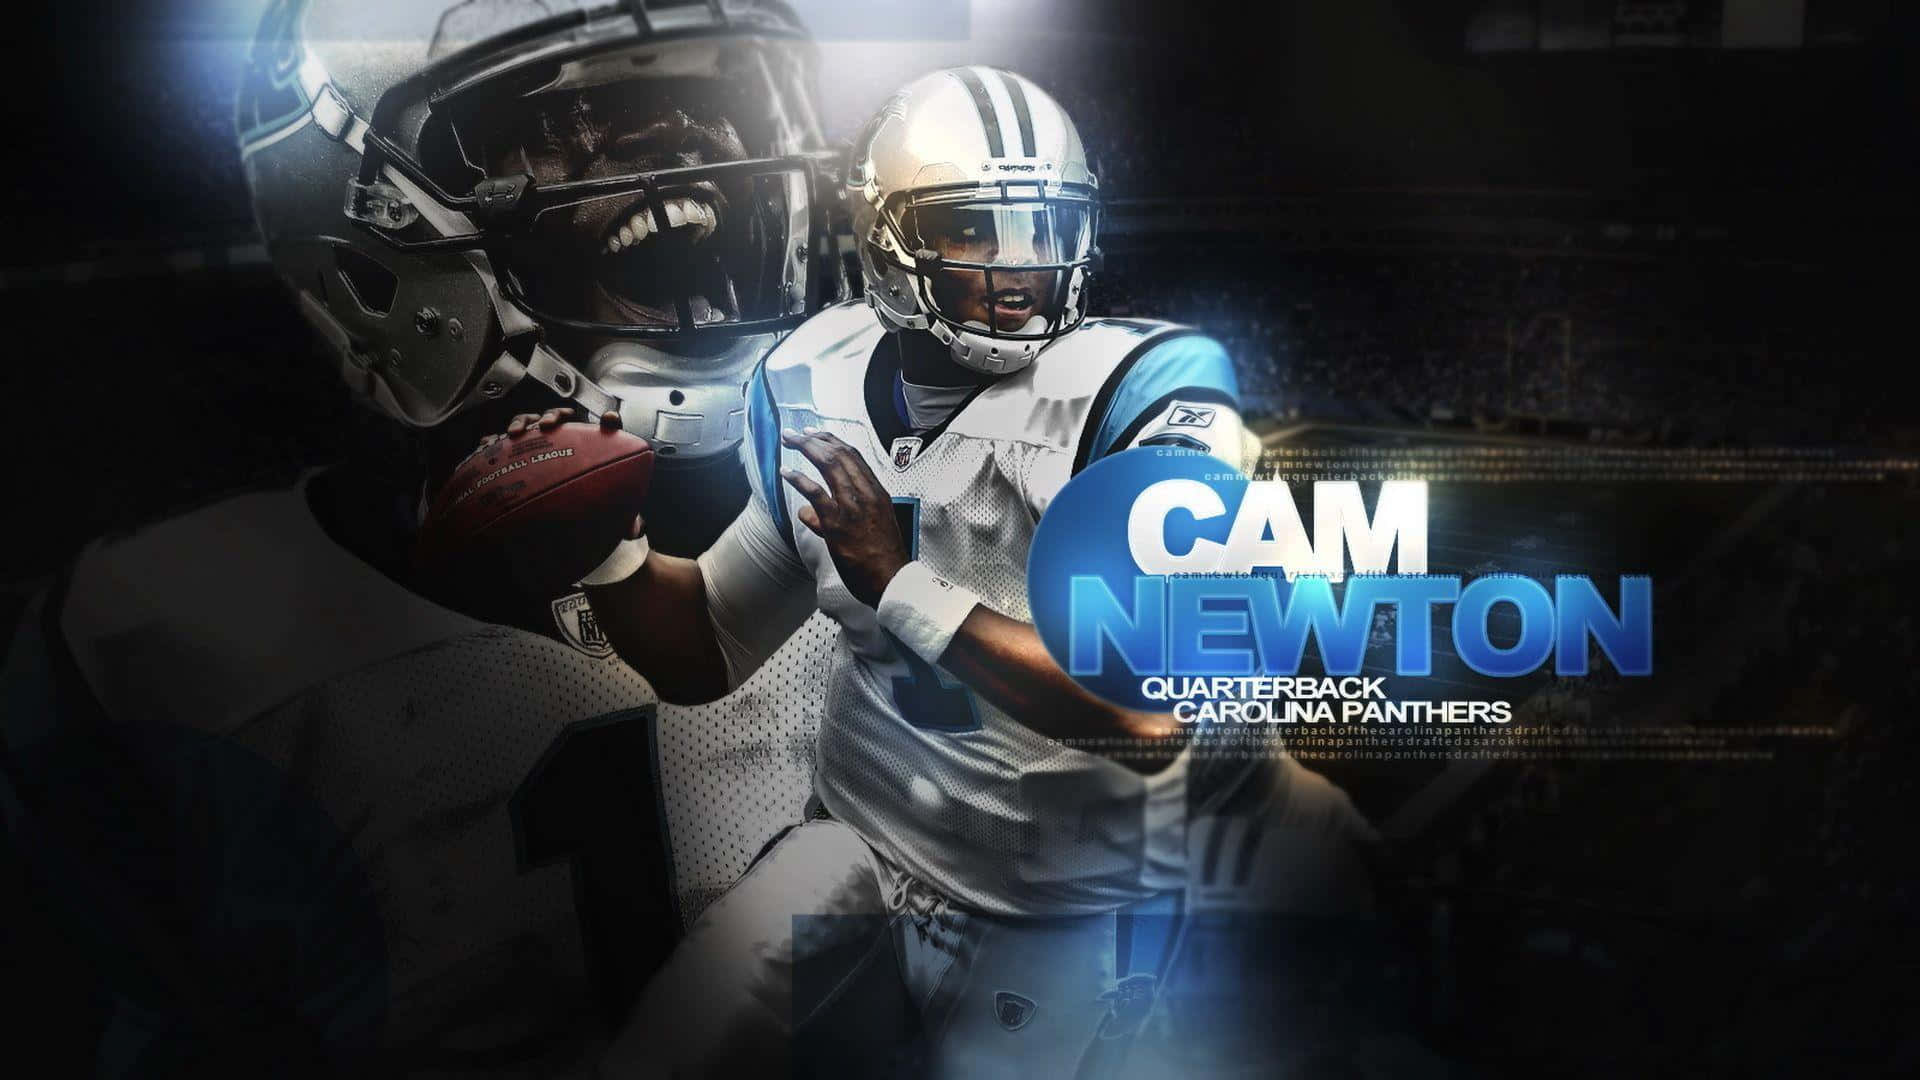 Cam Newton showcases the power behind his athleticism. Wallpaper